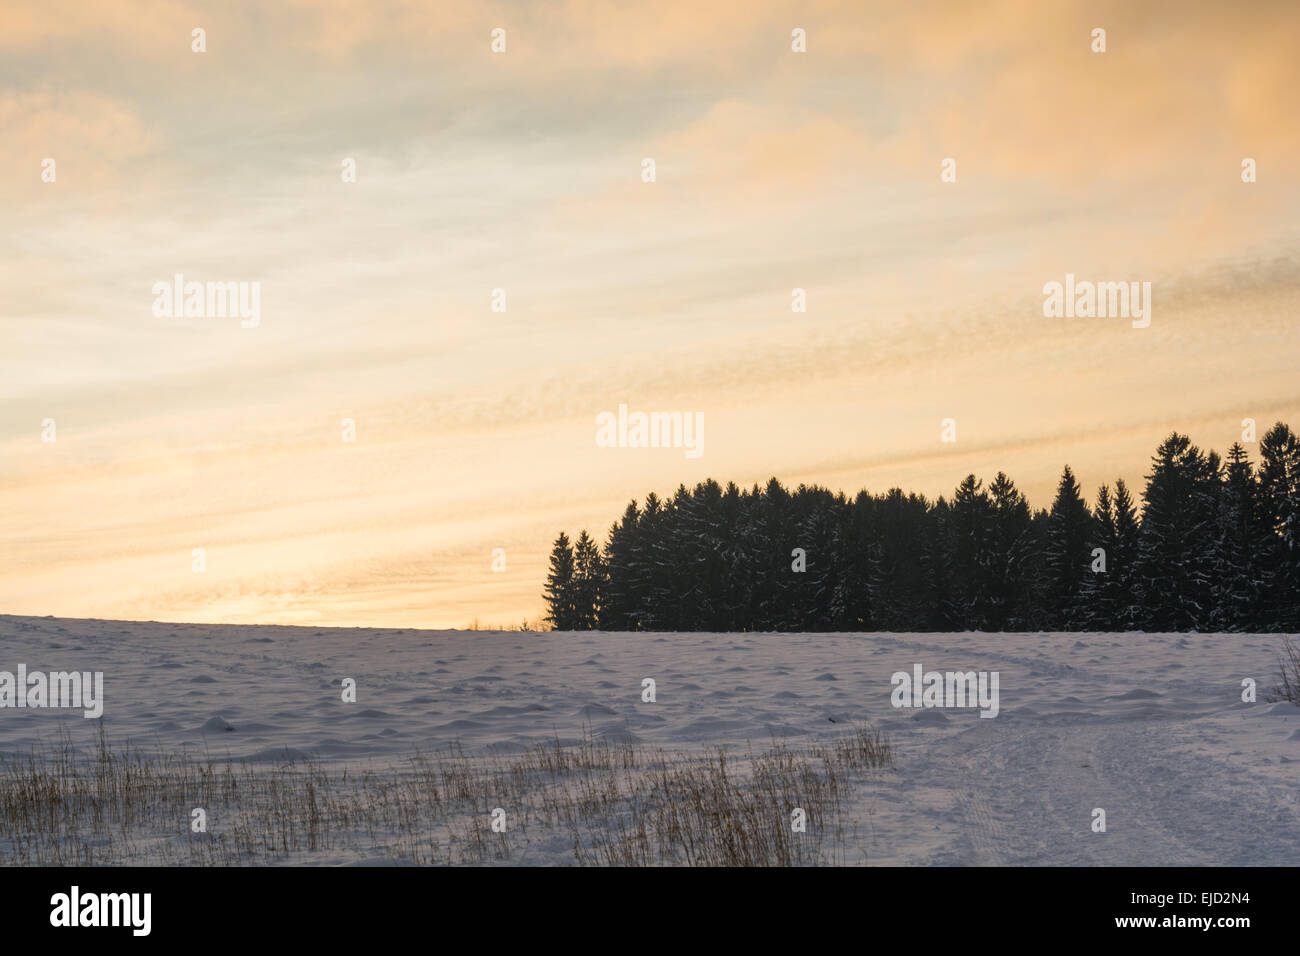 atmospheric evening in winter landscape image Stock Photo